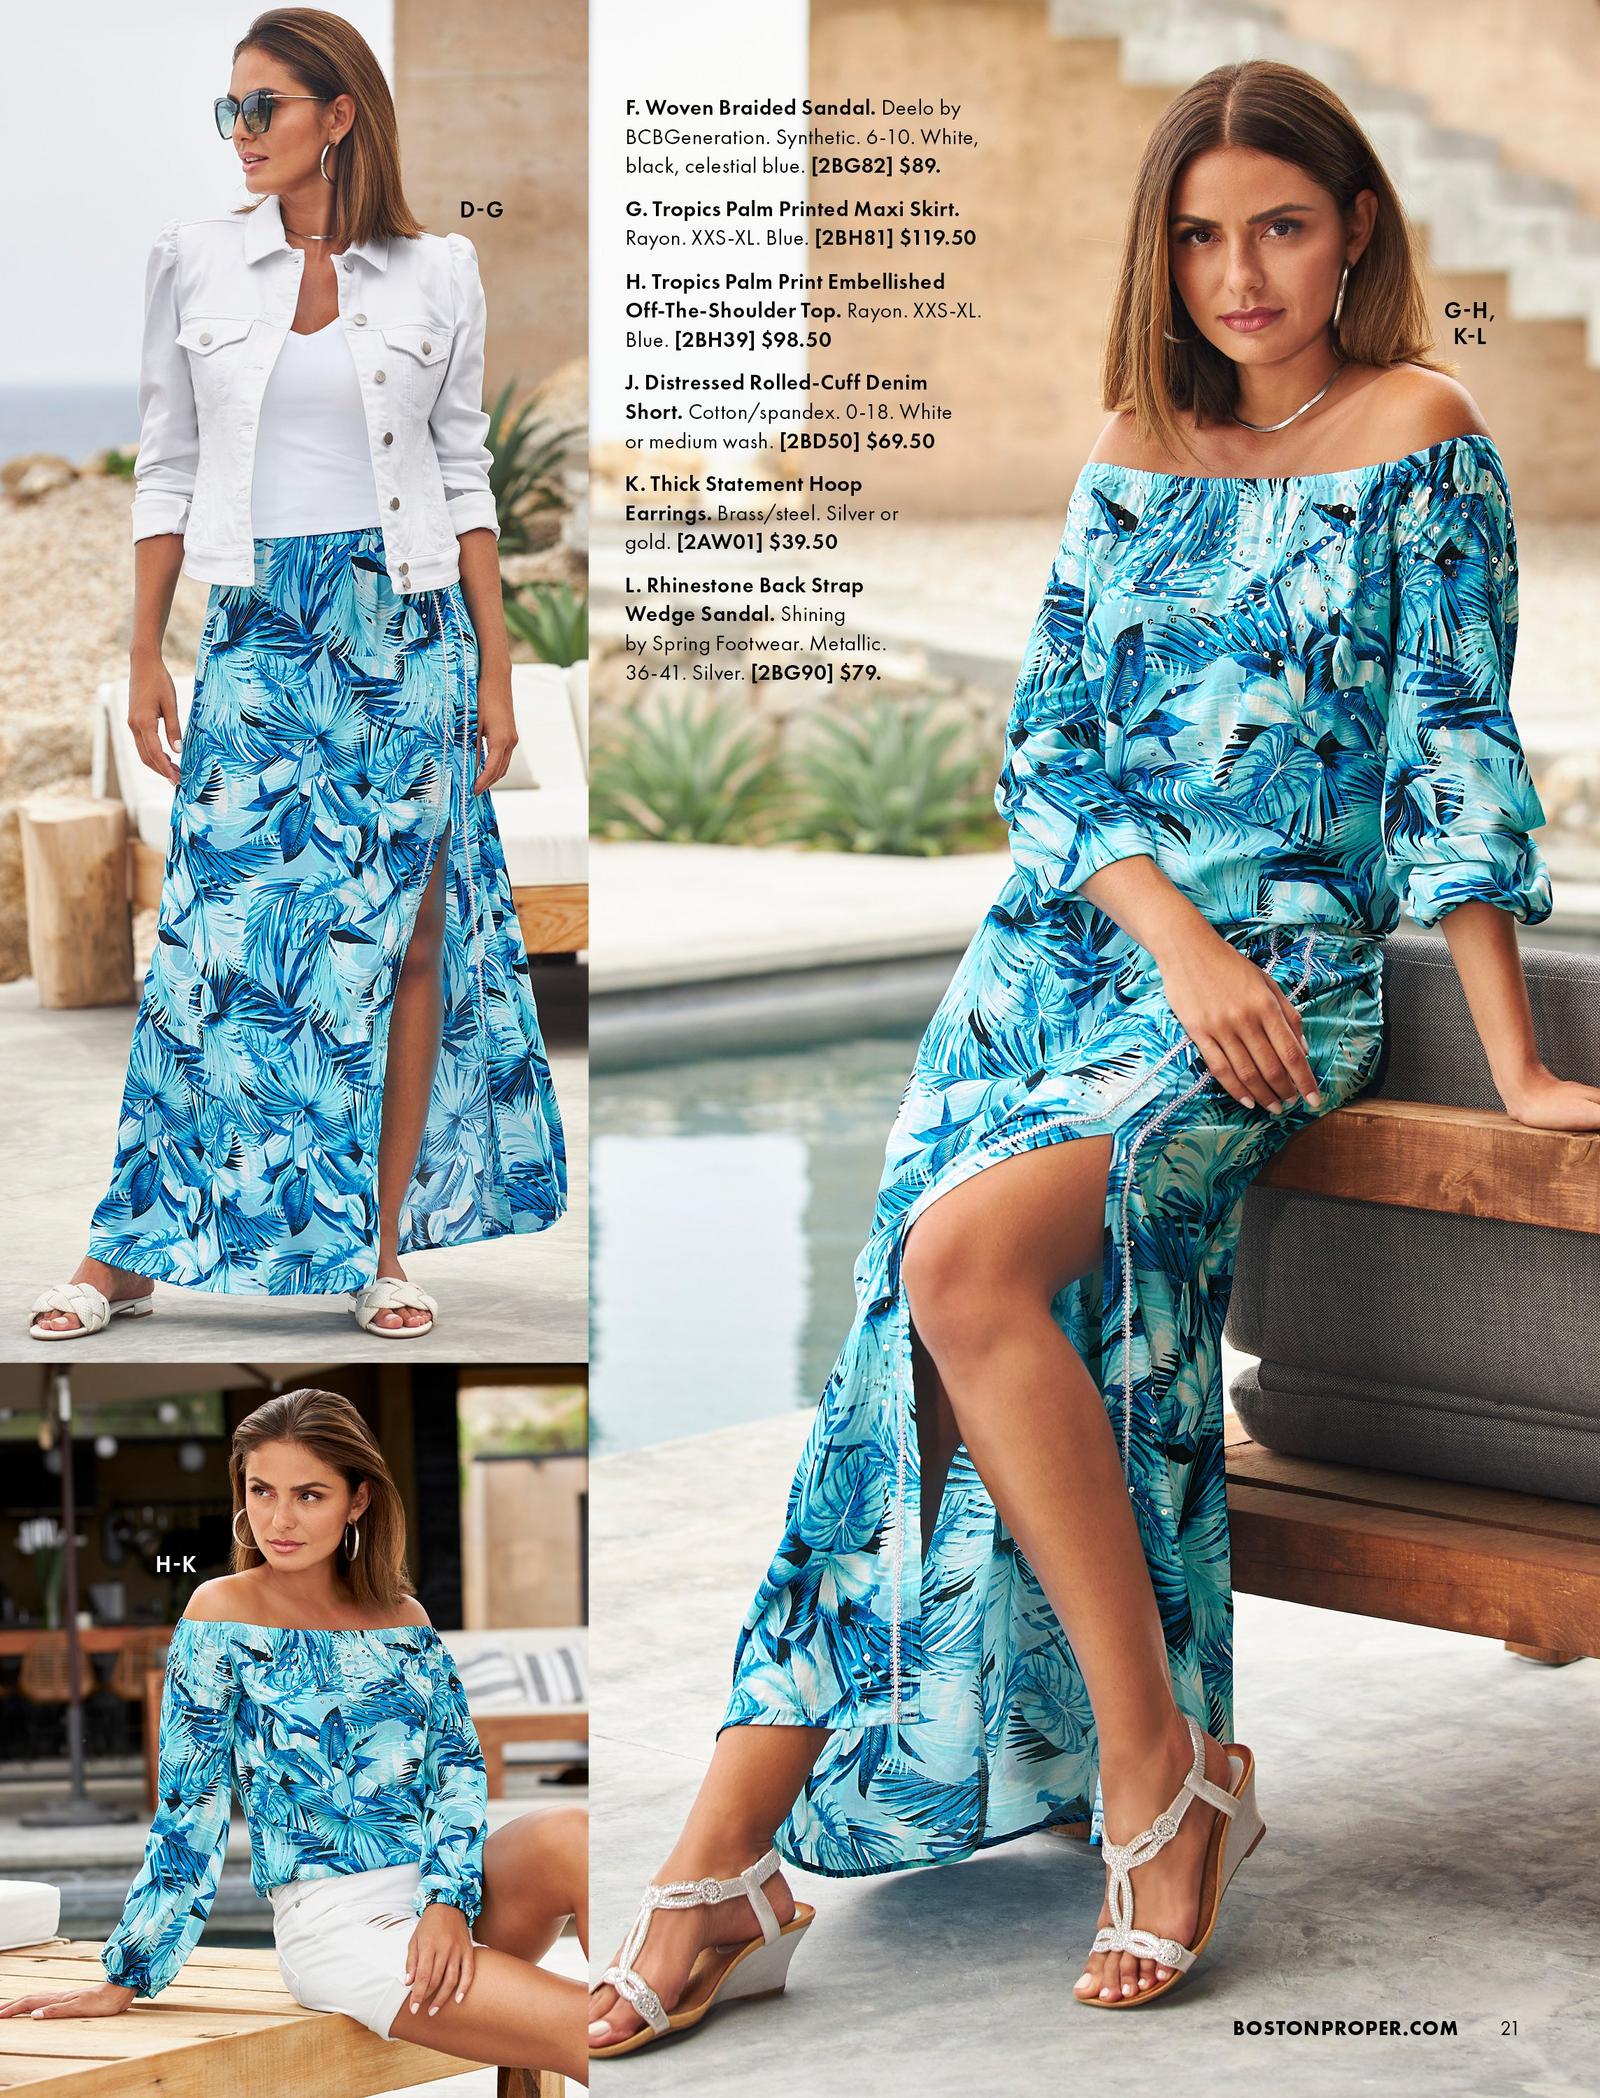 top left model wearing a white tank top, white denim jacket, blue palm print maxi skirt, white braided slide sandals, and sunglasses. bottom left model wearing a blue palm print off-the-shoulder top, white denim shorts and silver hoop earrings. right model wearing a blue palm print off-the-shoulder top, blue palm print maxi skirt, and rhinestone embellished wedge sandals.